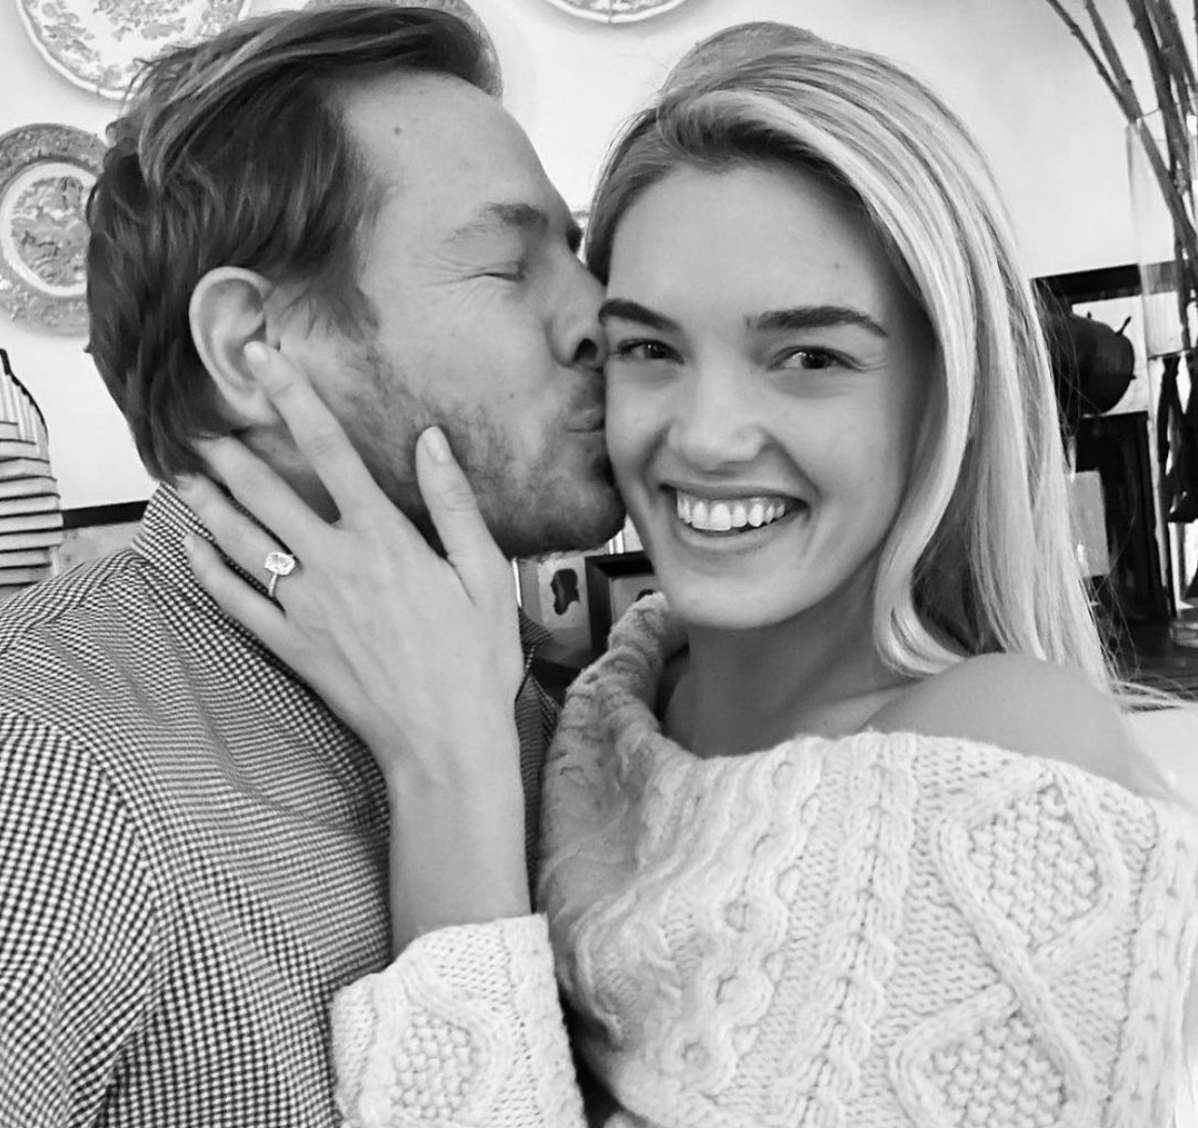 Will Kopelman and Allie Michler engagement 1/31